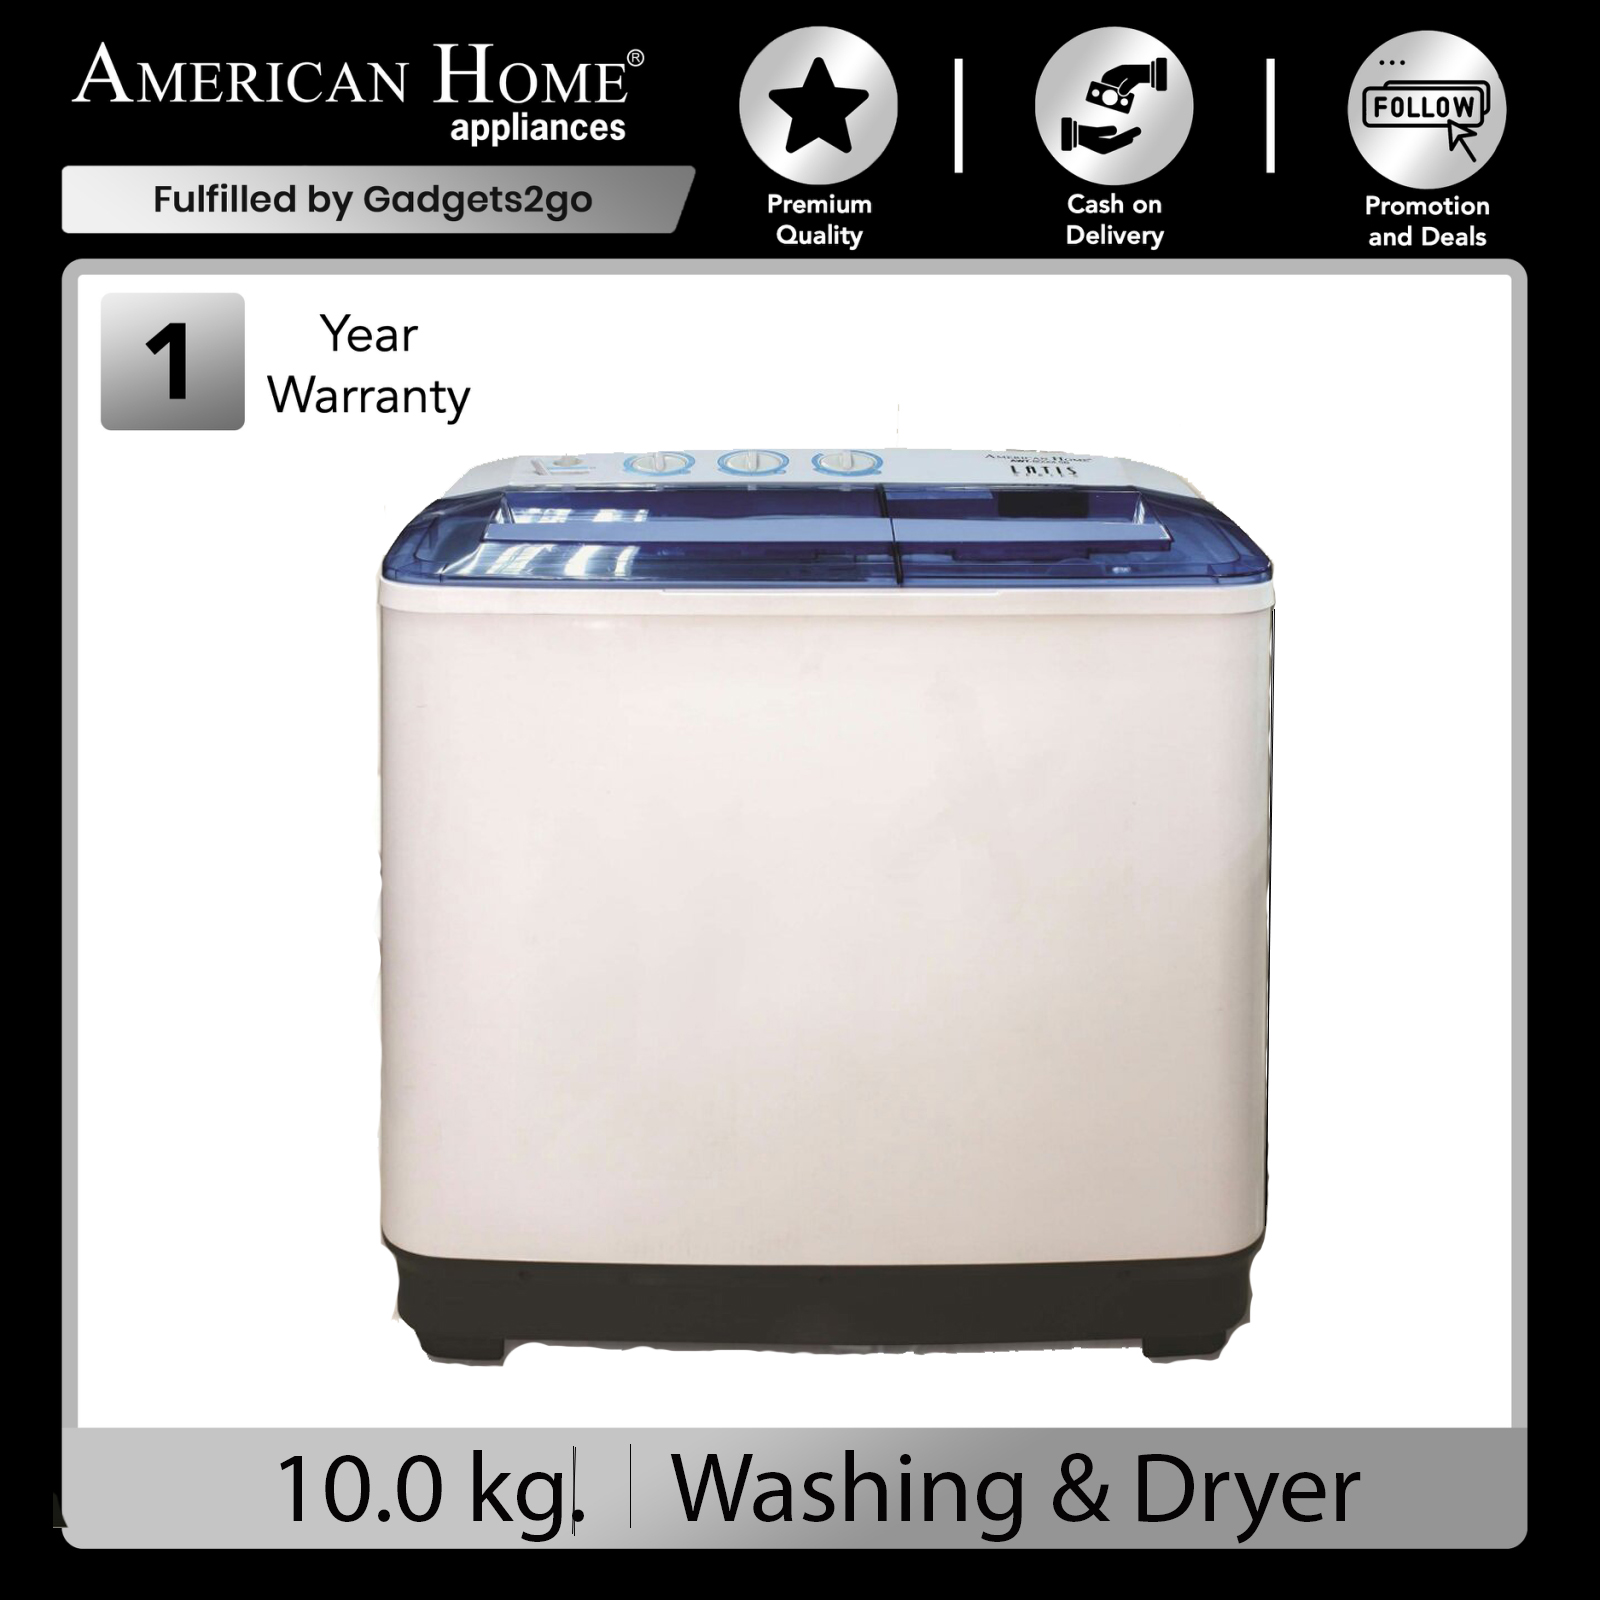 57 Hots American home automatic washing machine price philippines Trend in 2021